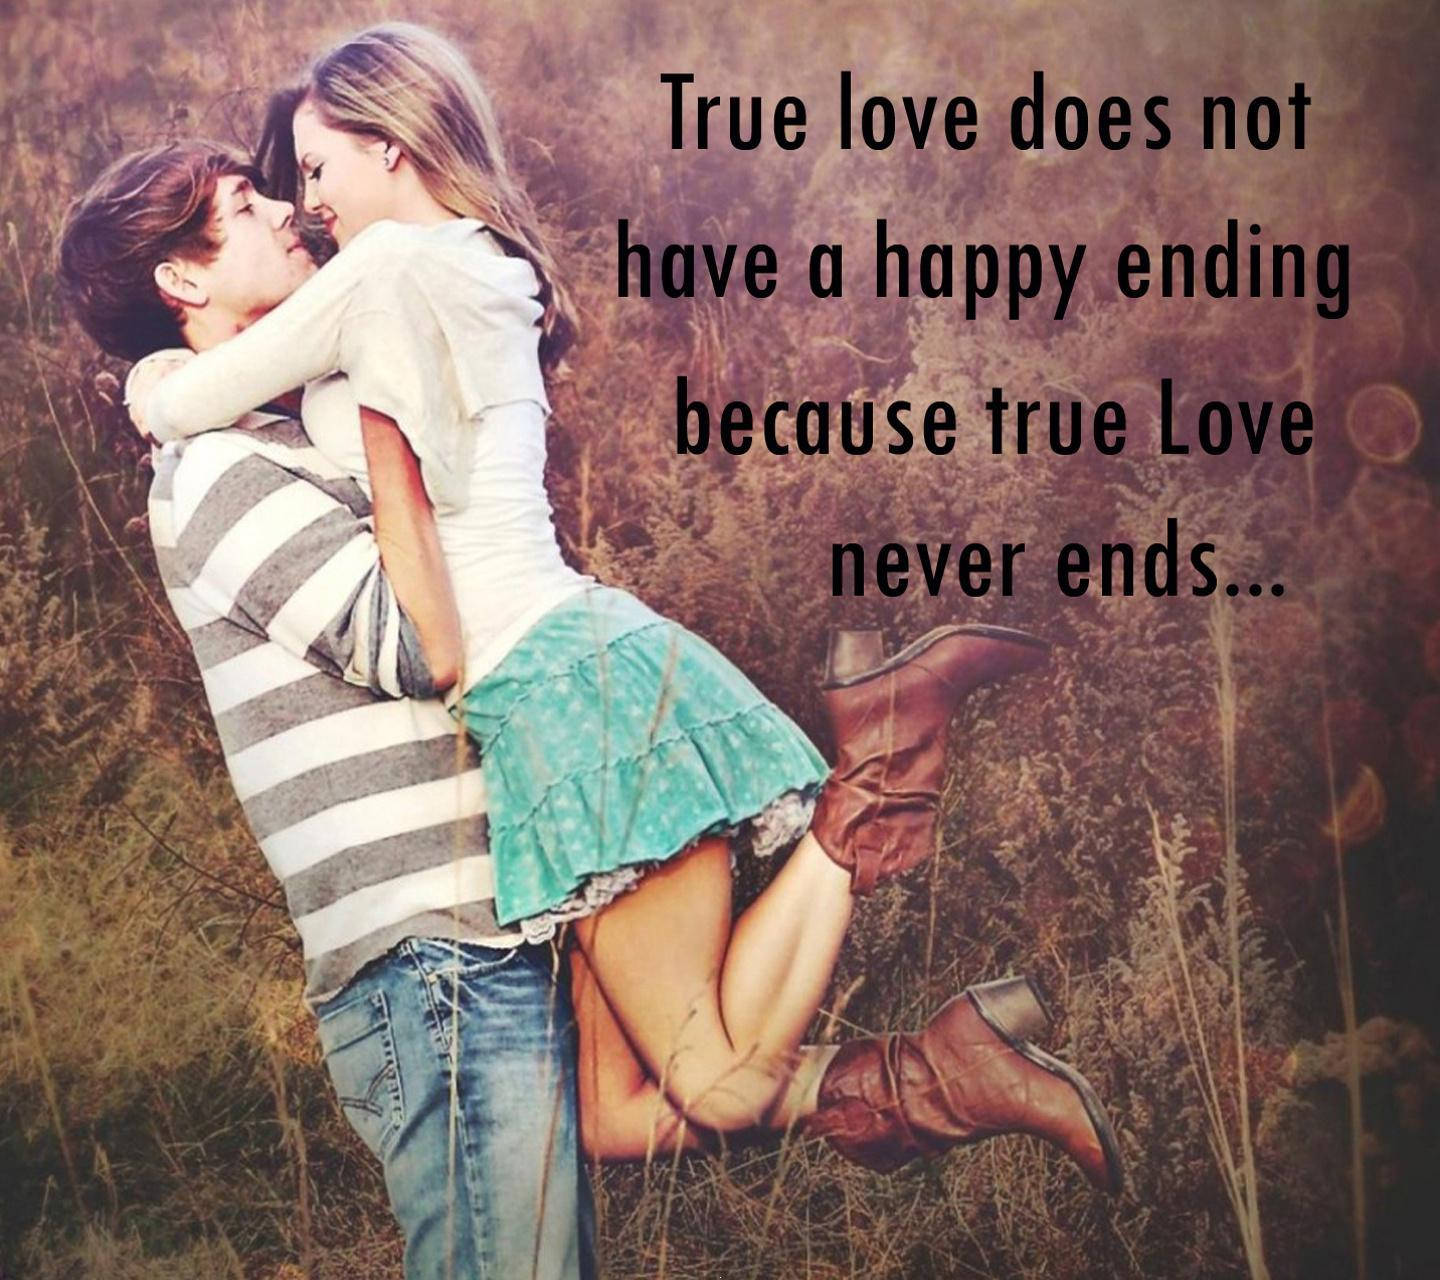 what is true love images